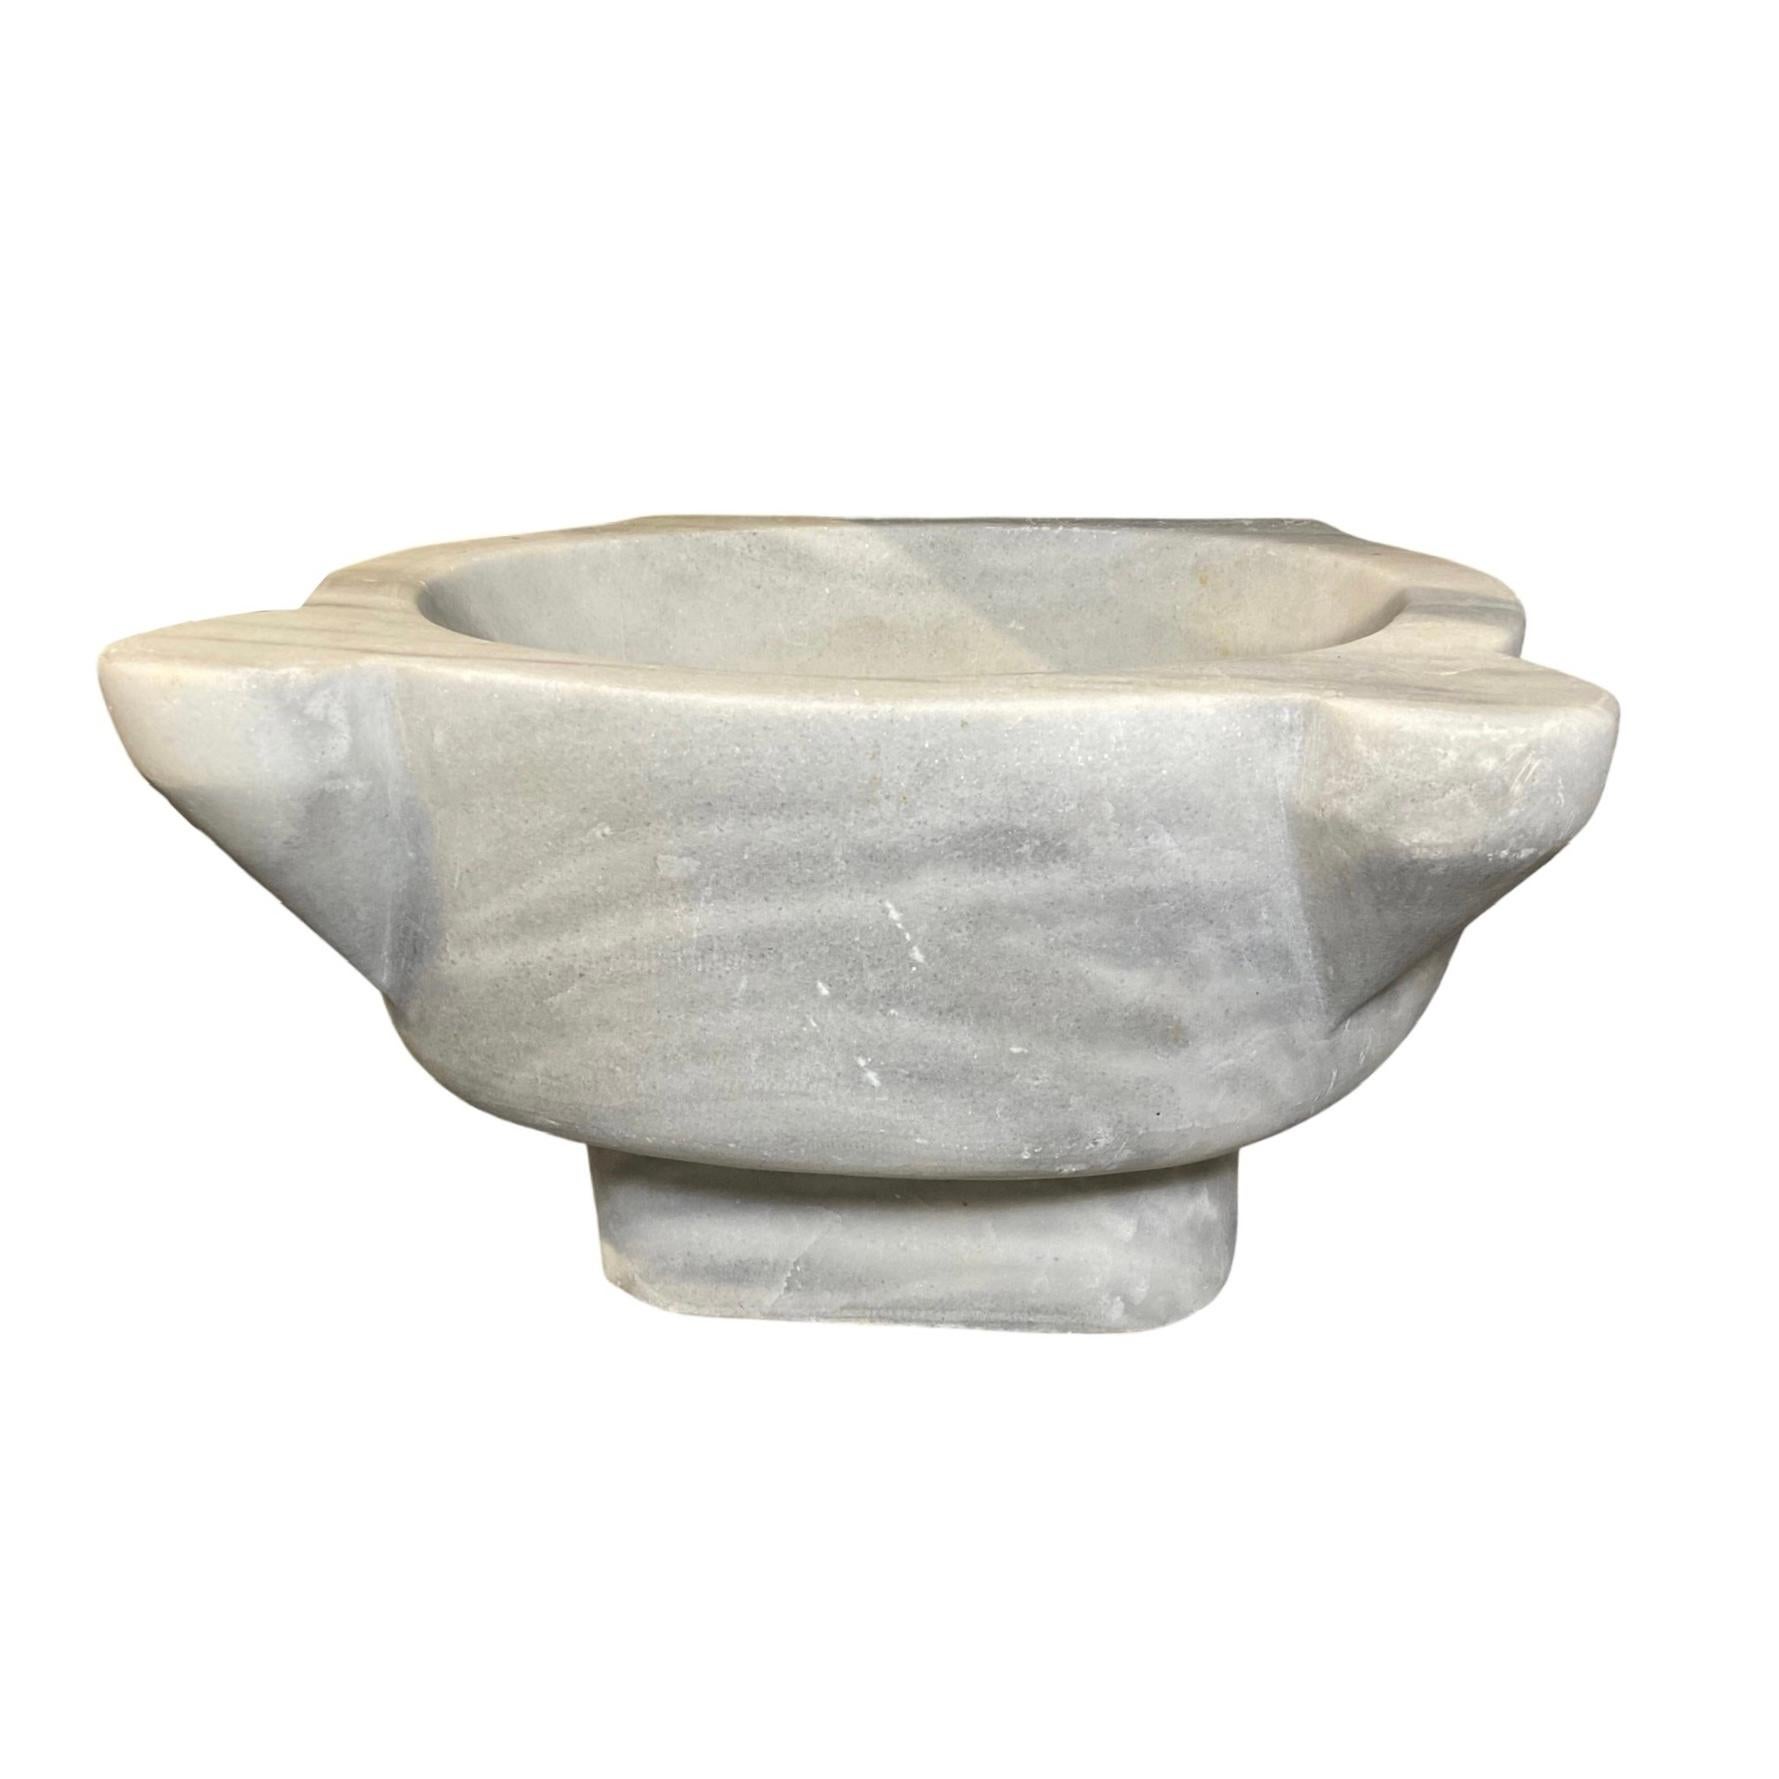 This Classic French white marble sink is exquisitely crafted, dating back to the 18th century. The Classic marble will add timeless appeal to your bathroom or kitchen, perfect for any design style.